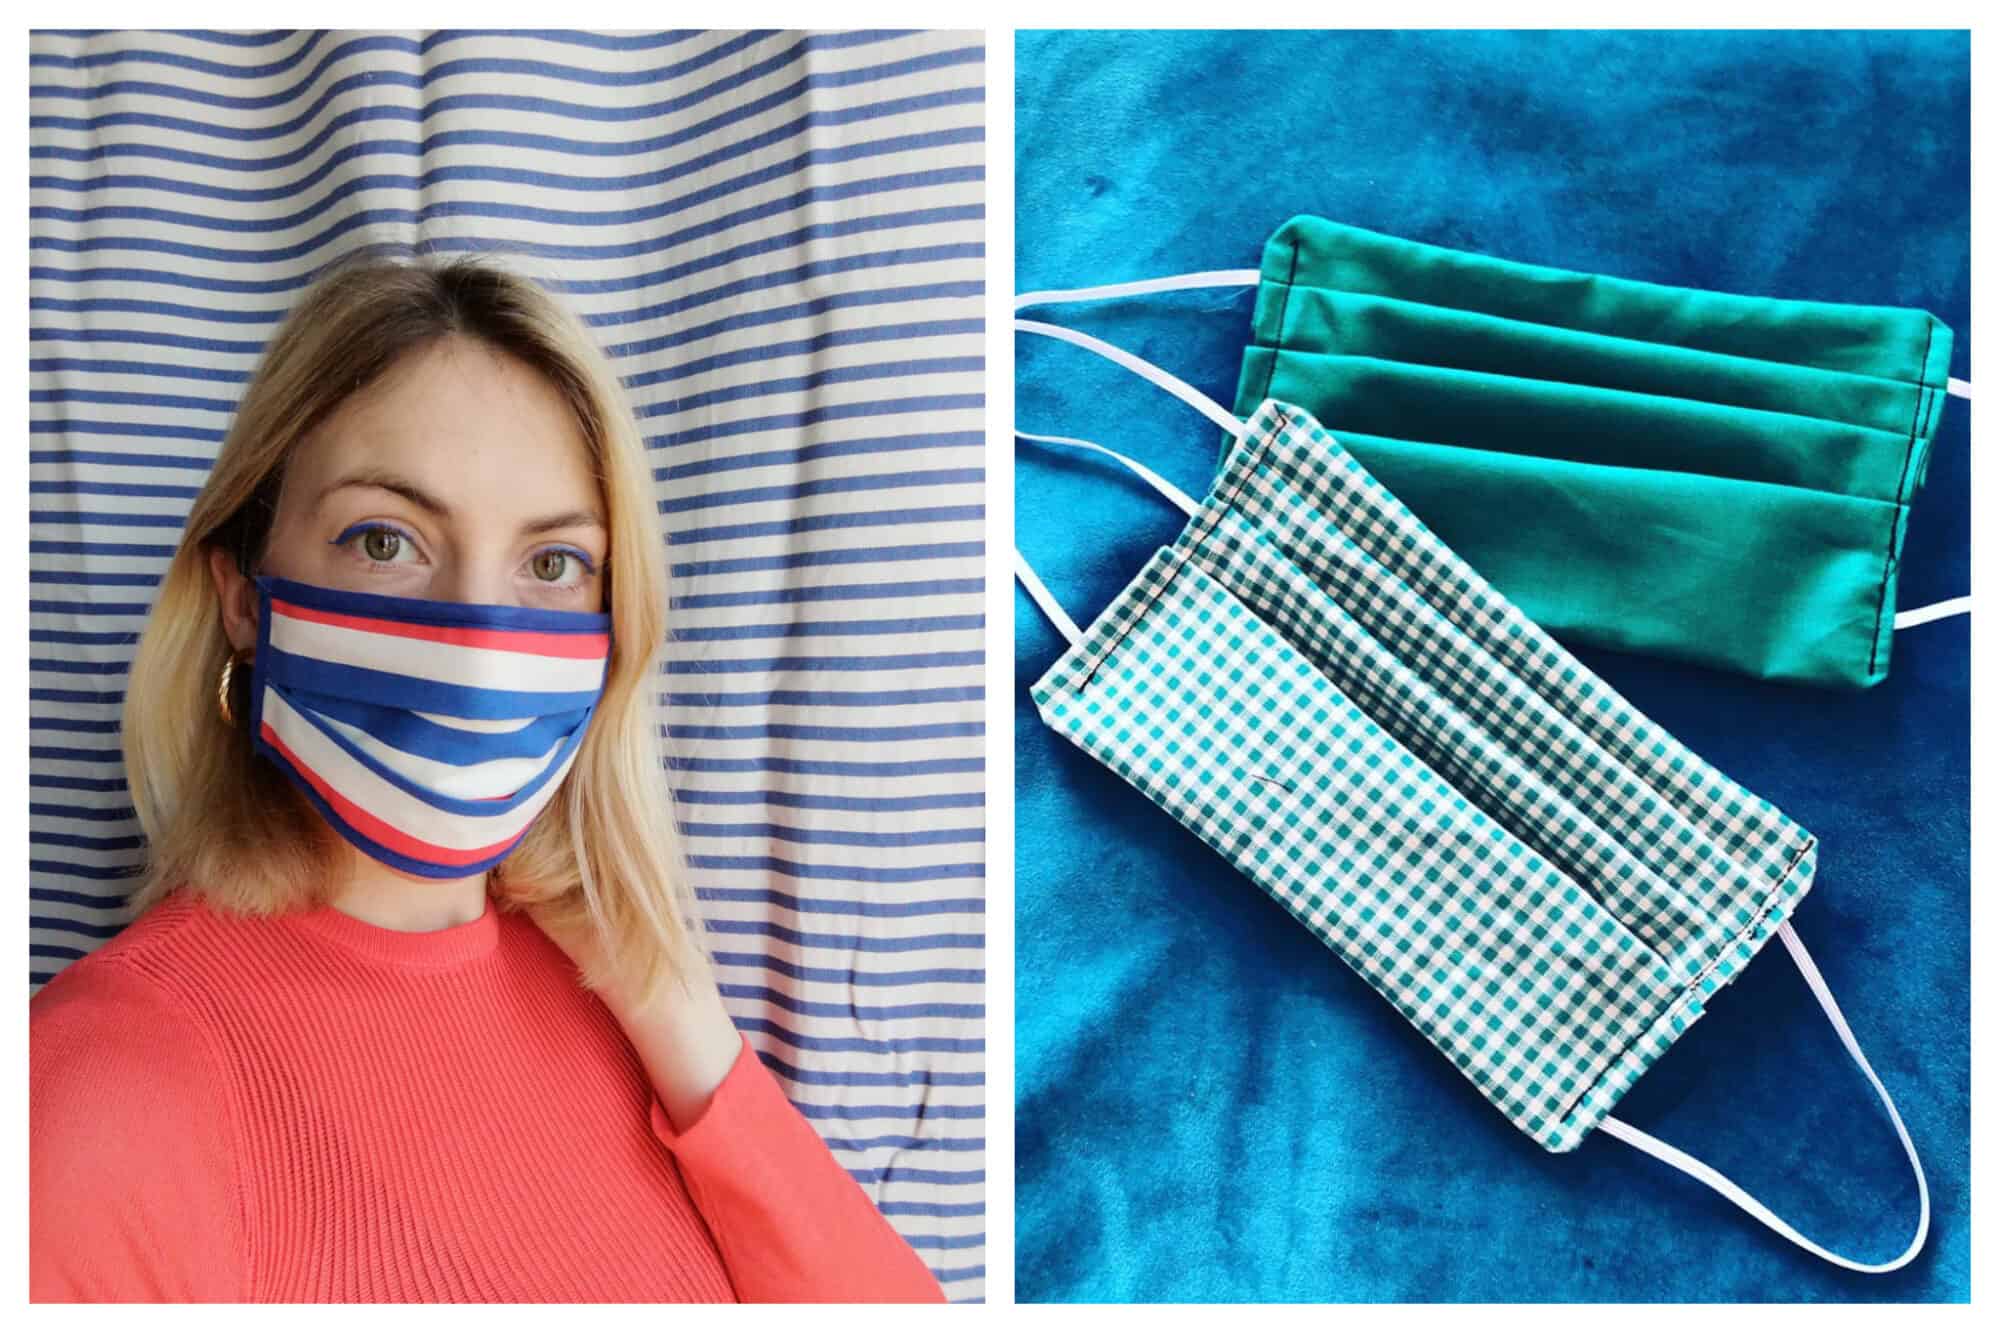 Left: A blonde woman wears a blue white and red face mask.
Right: a gingham green and white face mask and a plain emerald green face mask on a blue velvet background.